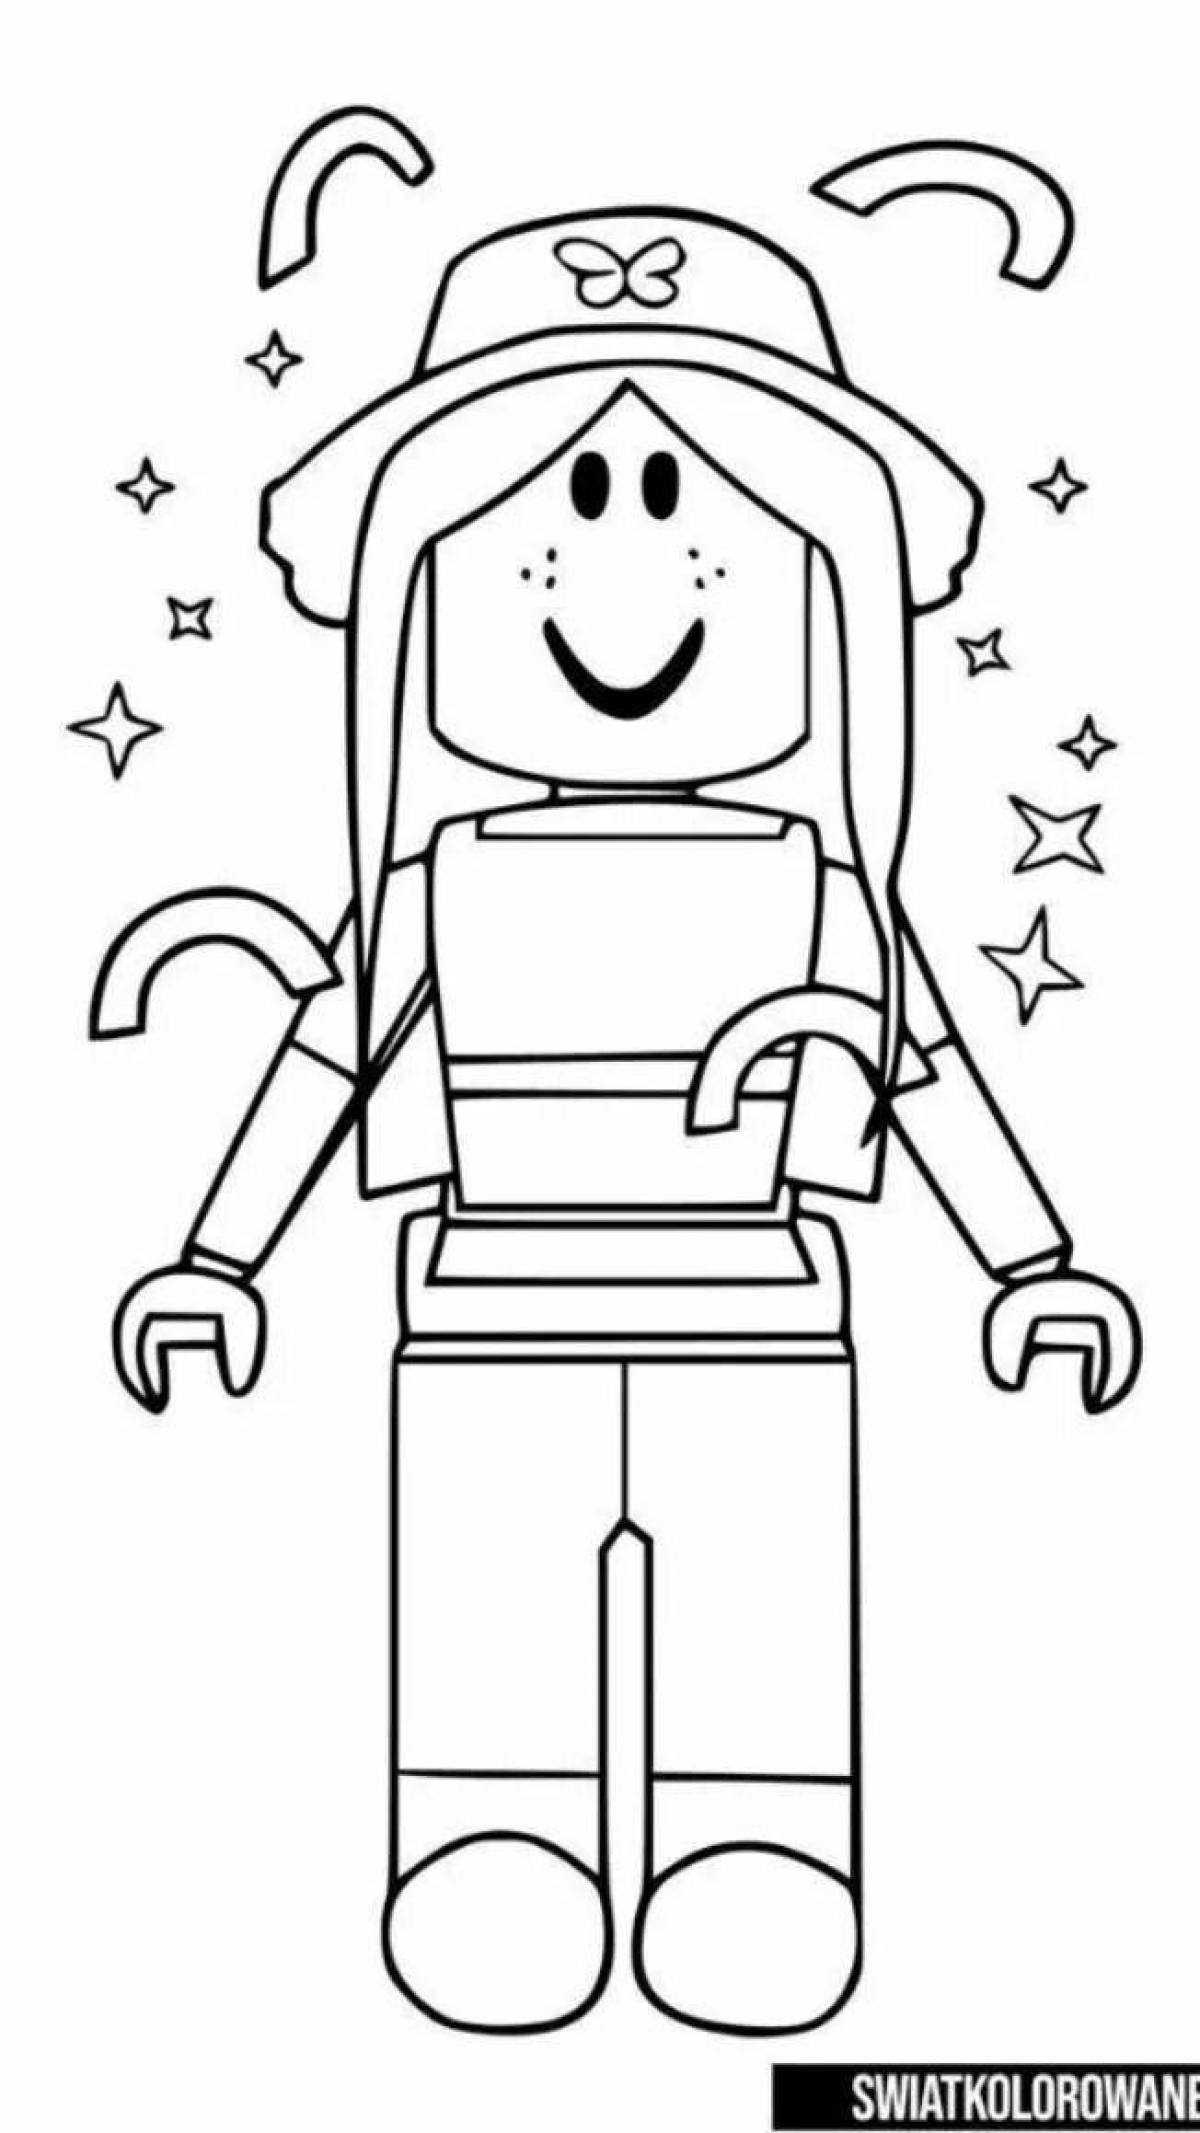 Roblox happy avatar coloring page